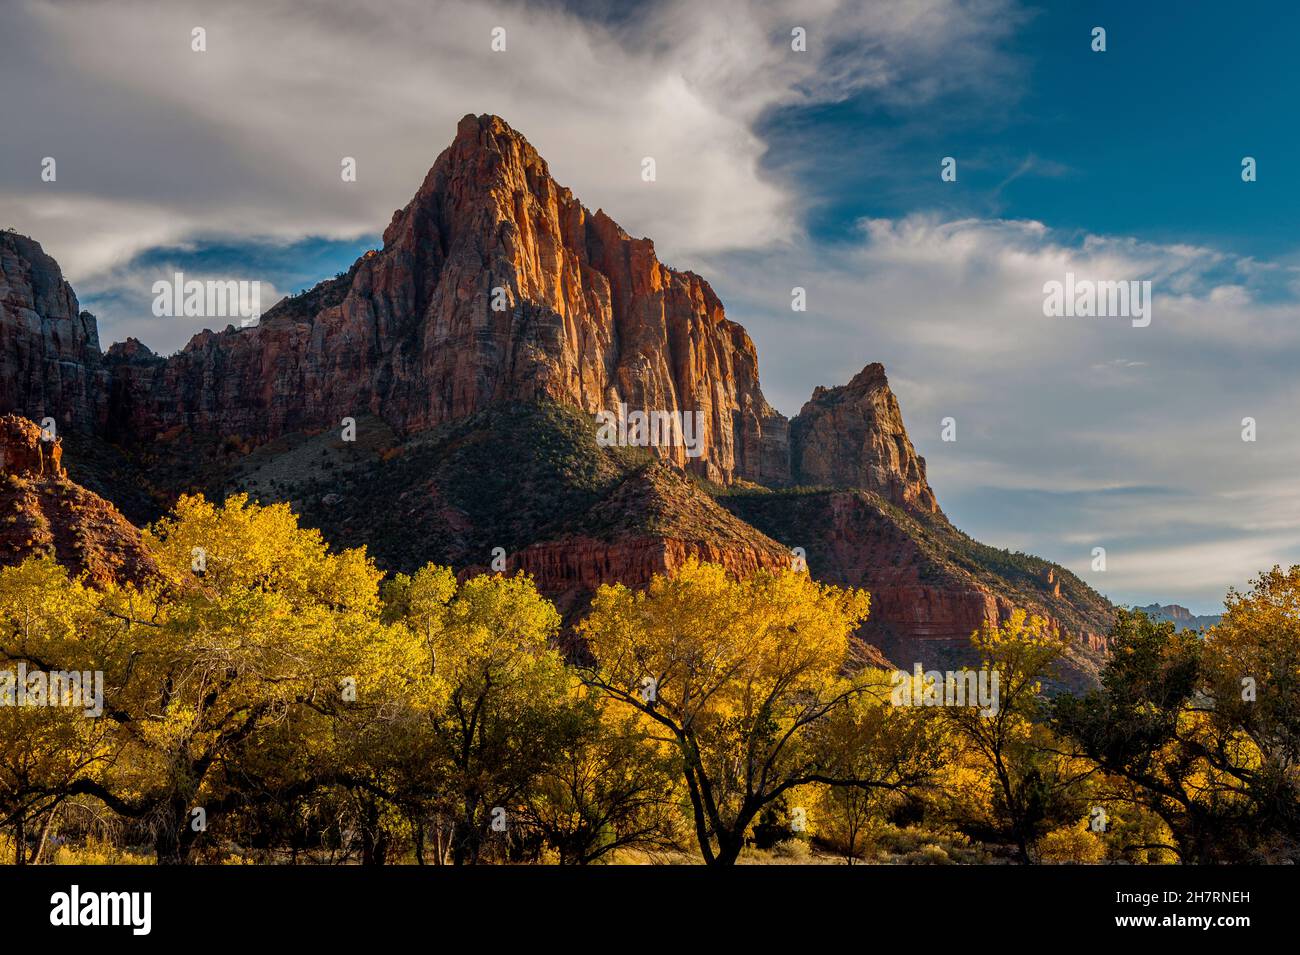 The Watchman, Zion National Park, Utah Stock Photo